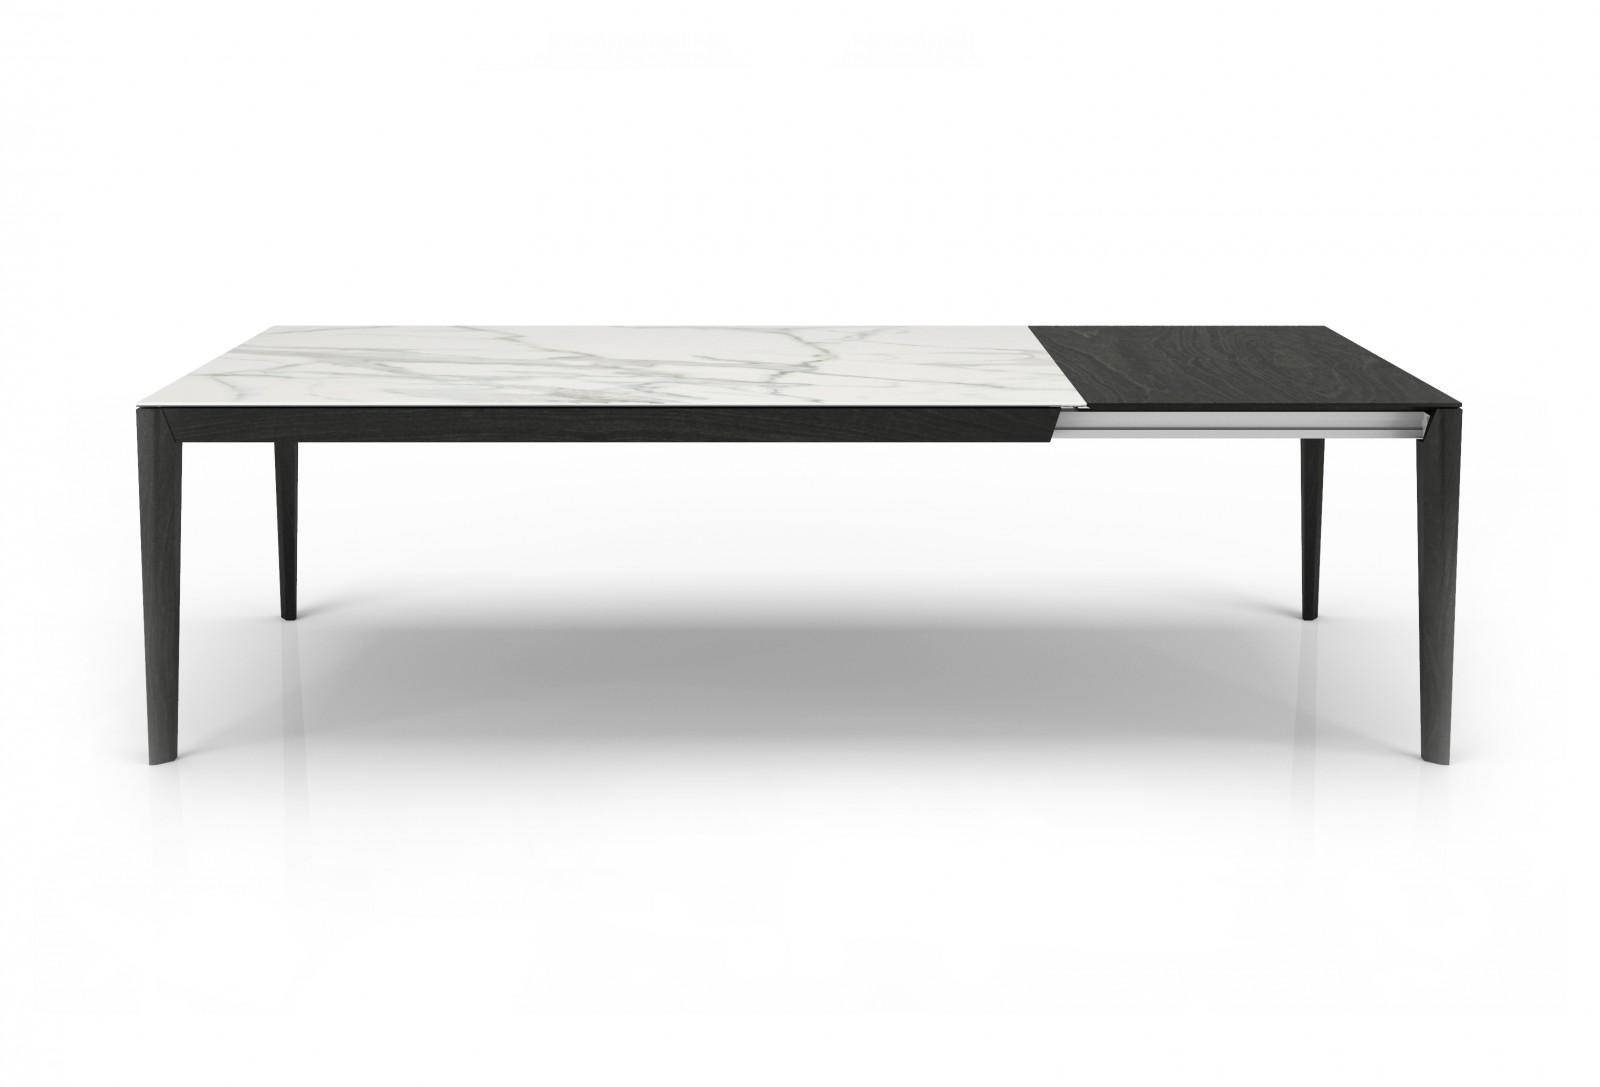 76" Ceramic top extension table